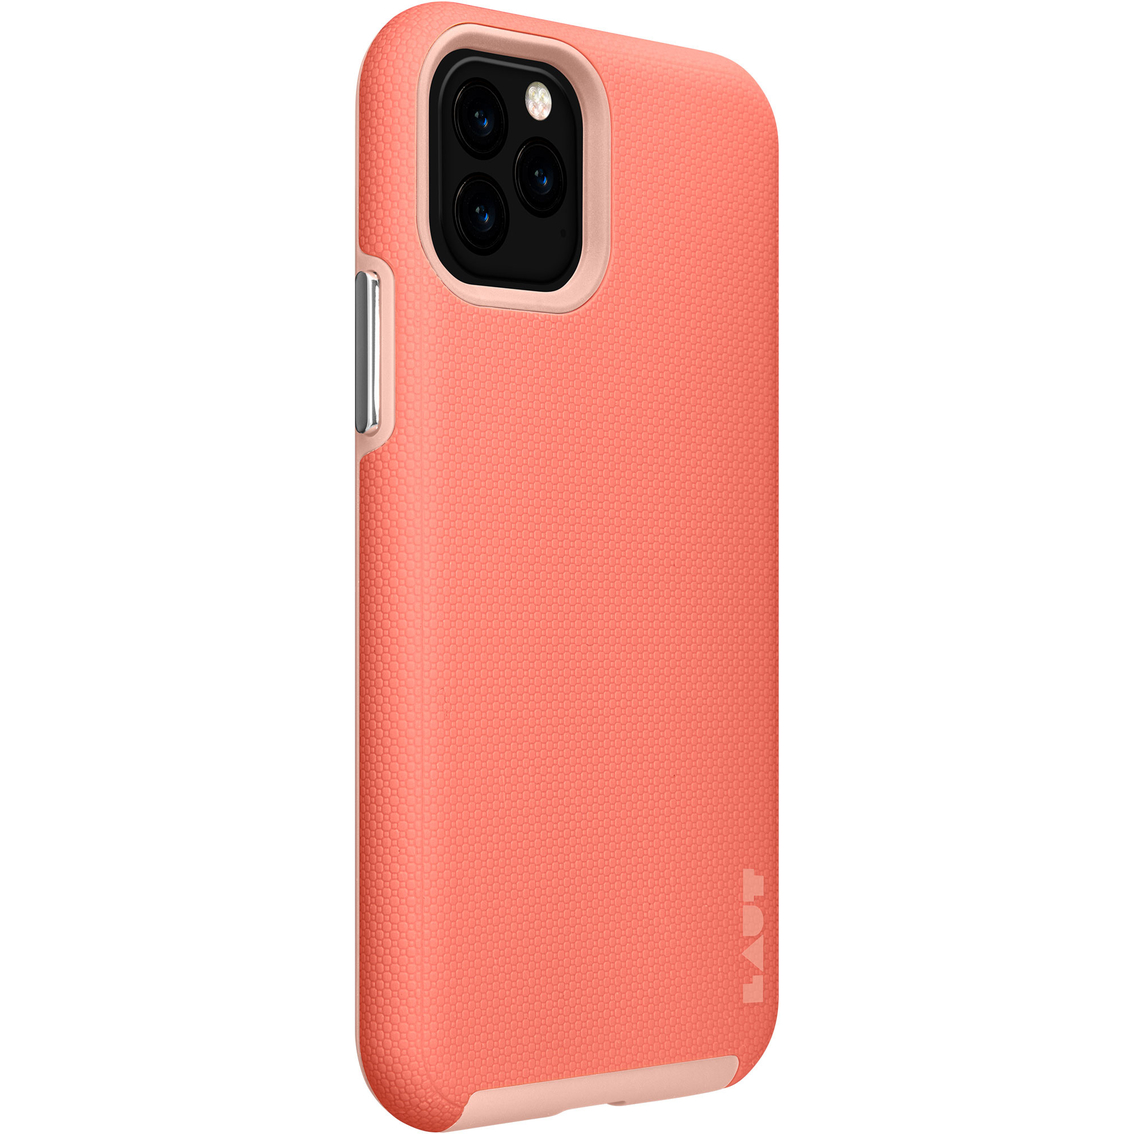 LAUT Design USA SHIELD Case for iPhone 11 - Image 2 of 5